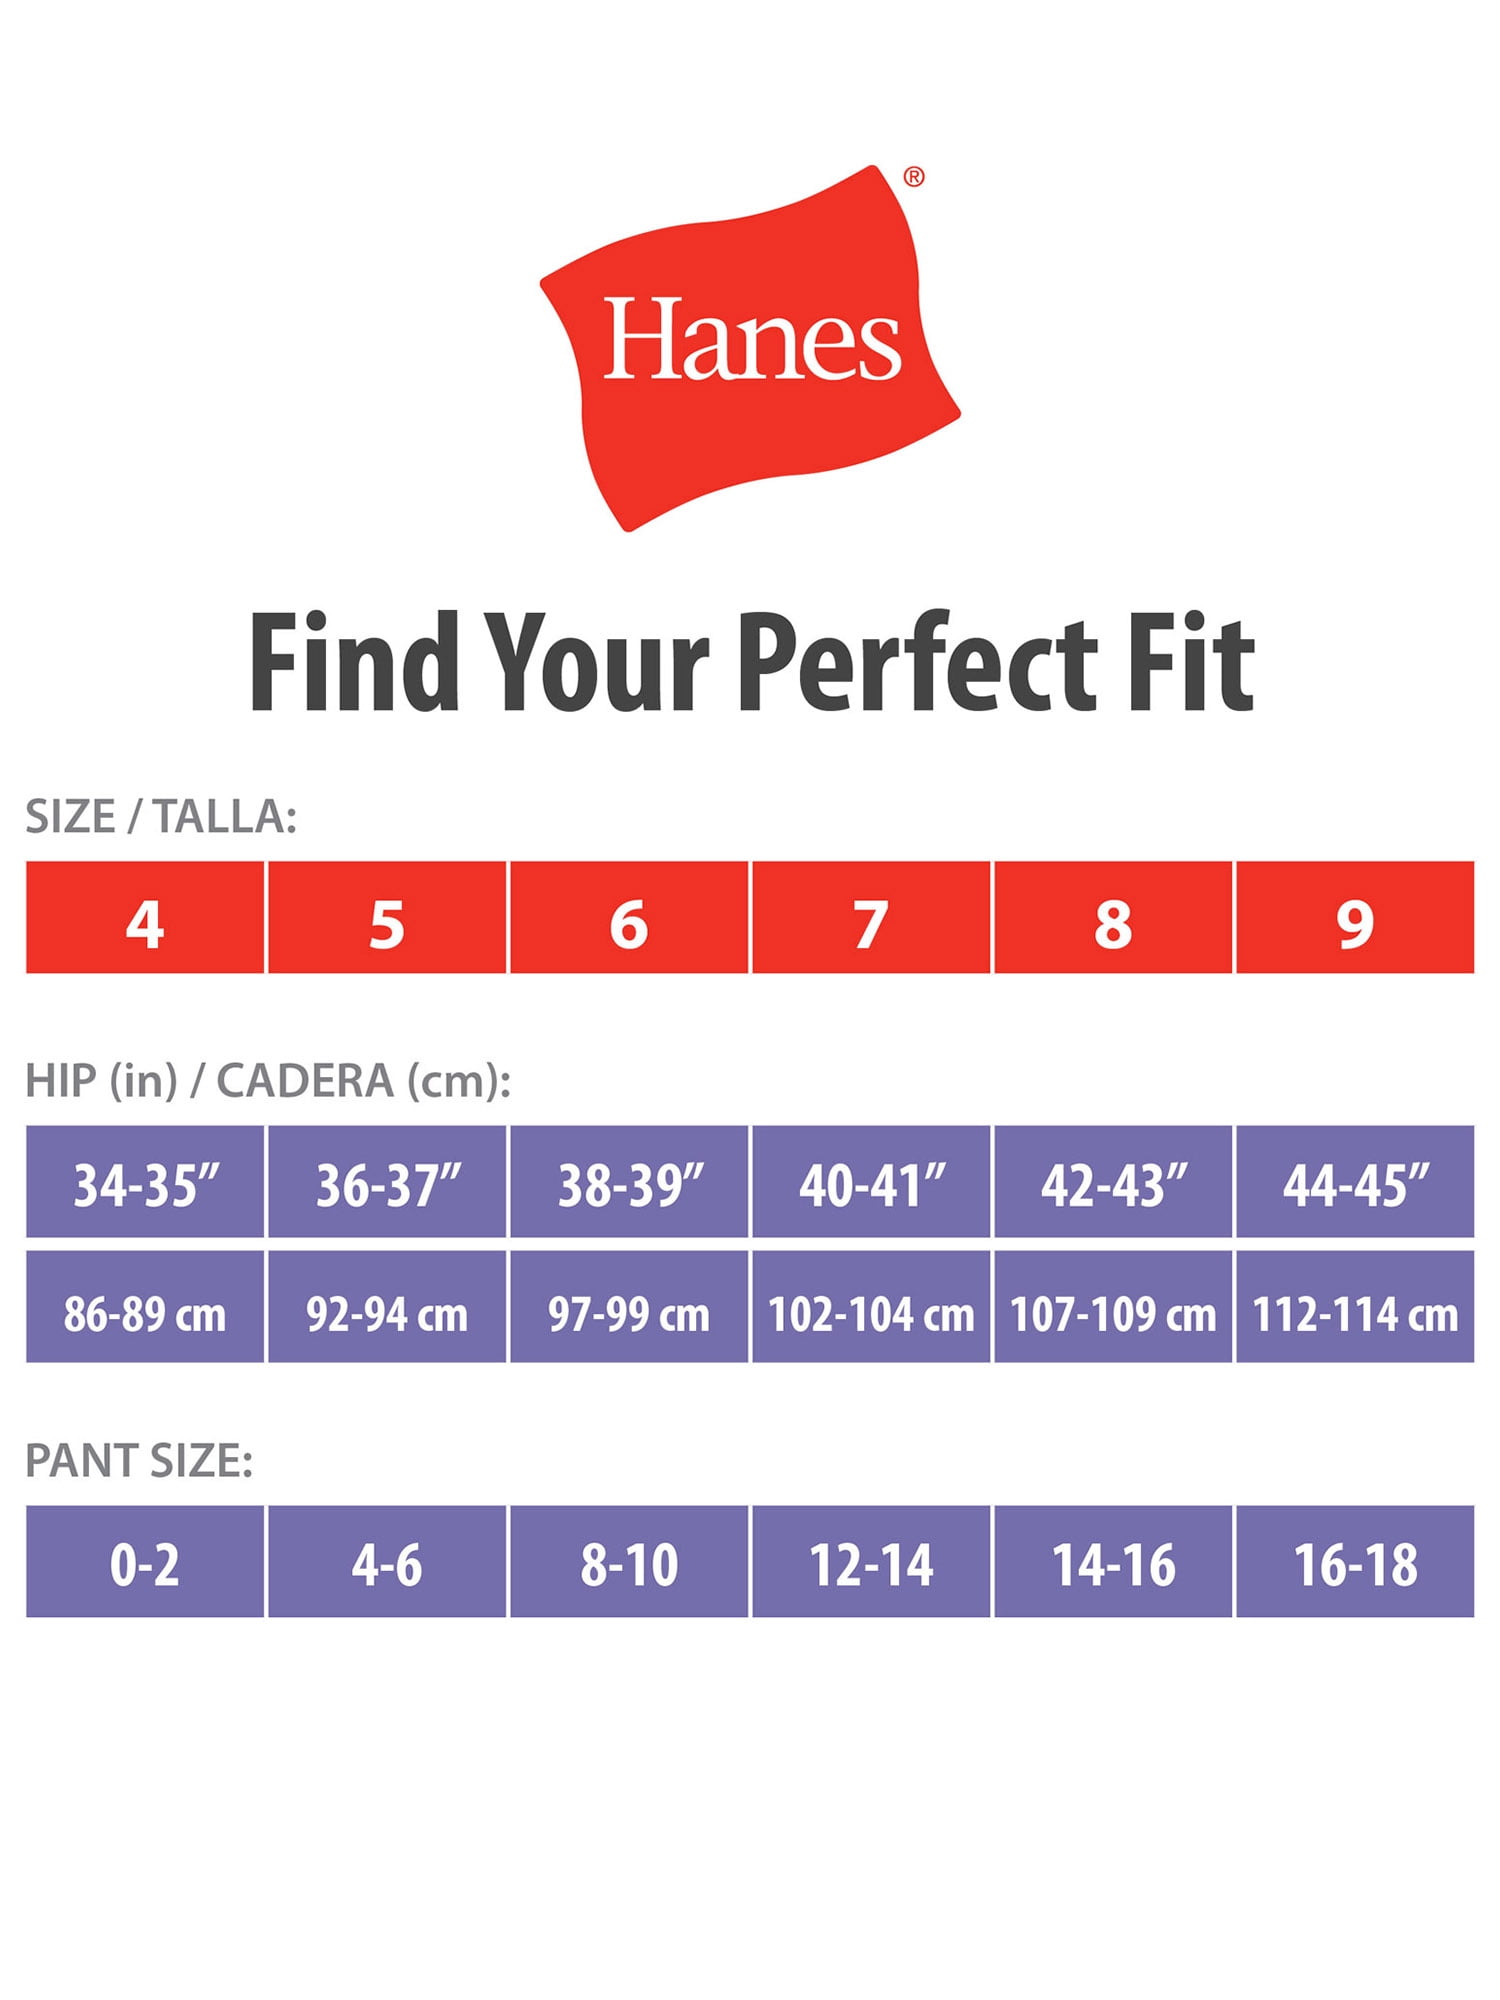 Hanes Cool Comfort Ladies Pastel Cotton Briefs Value Pack, 9, 5 count - The  Fresh Grocer